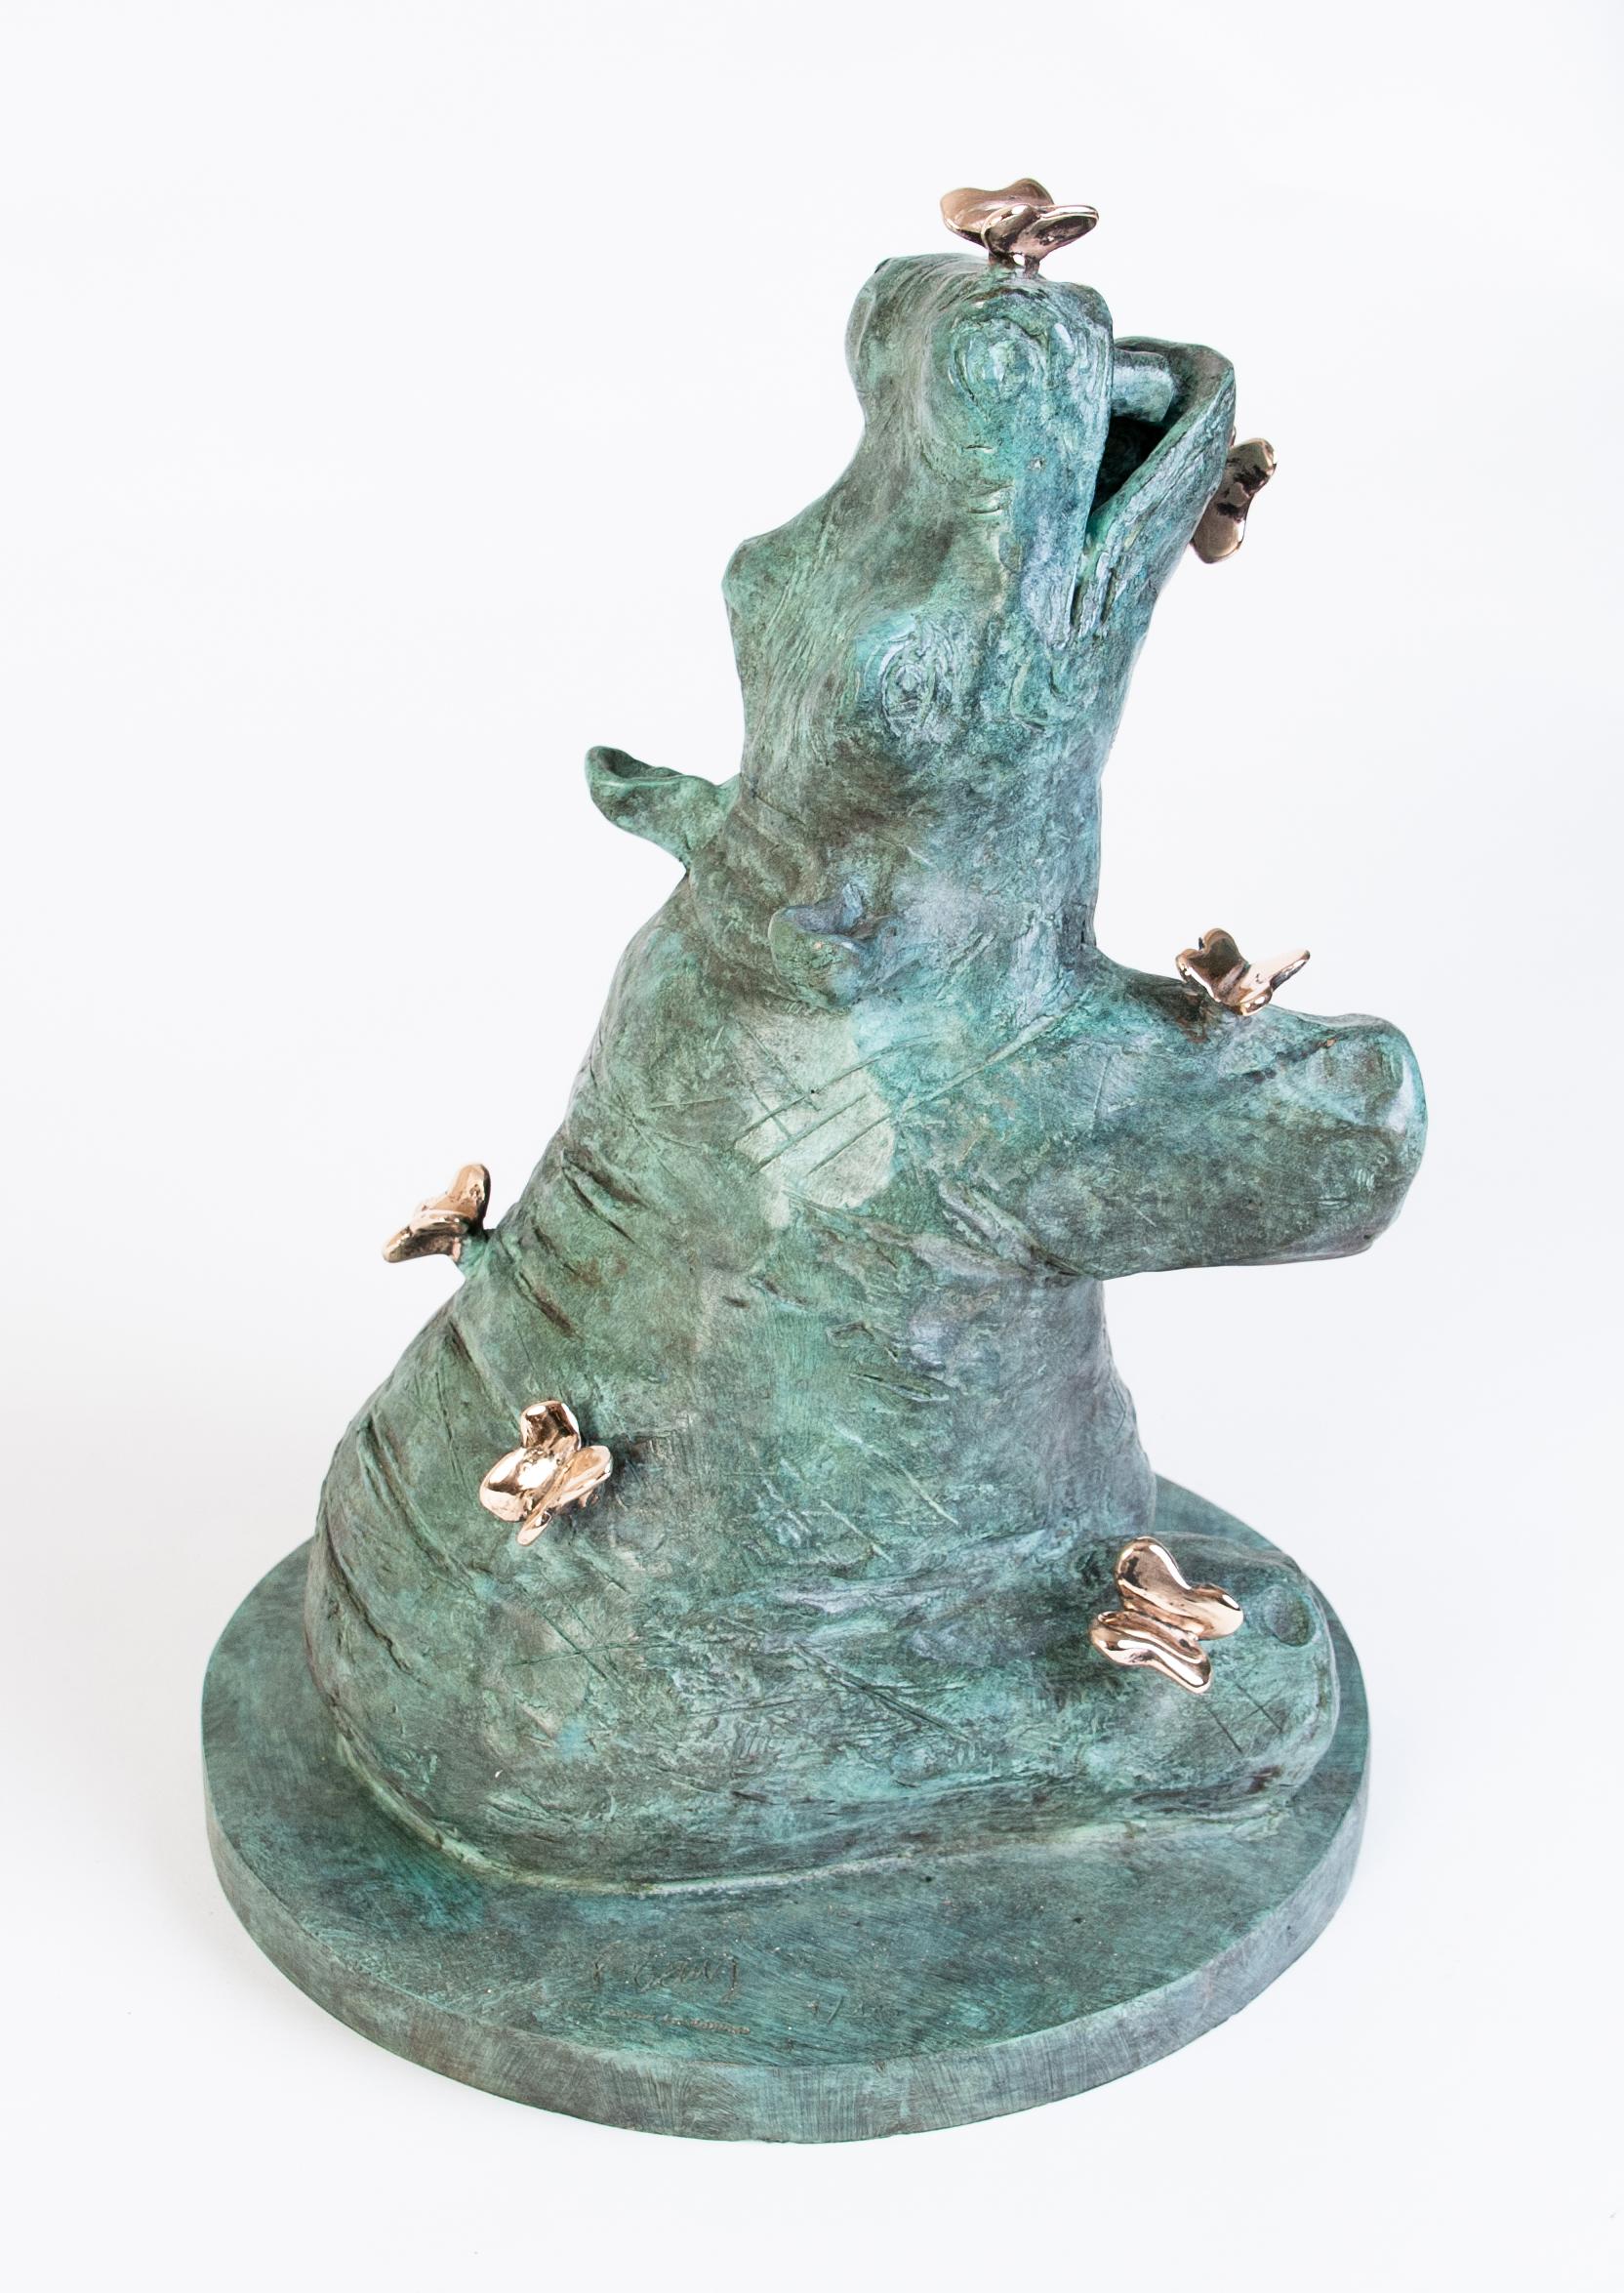 Hippo et Papillons - Modern Sculpture by Philippe Berry